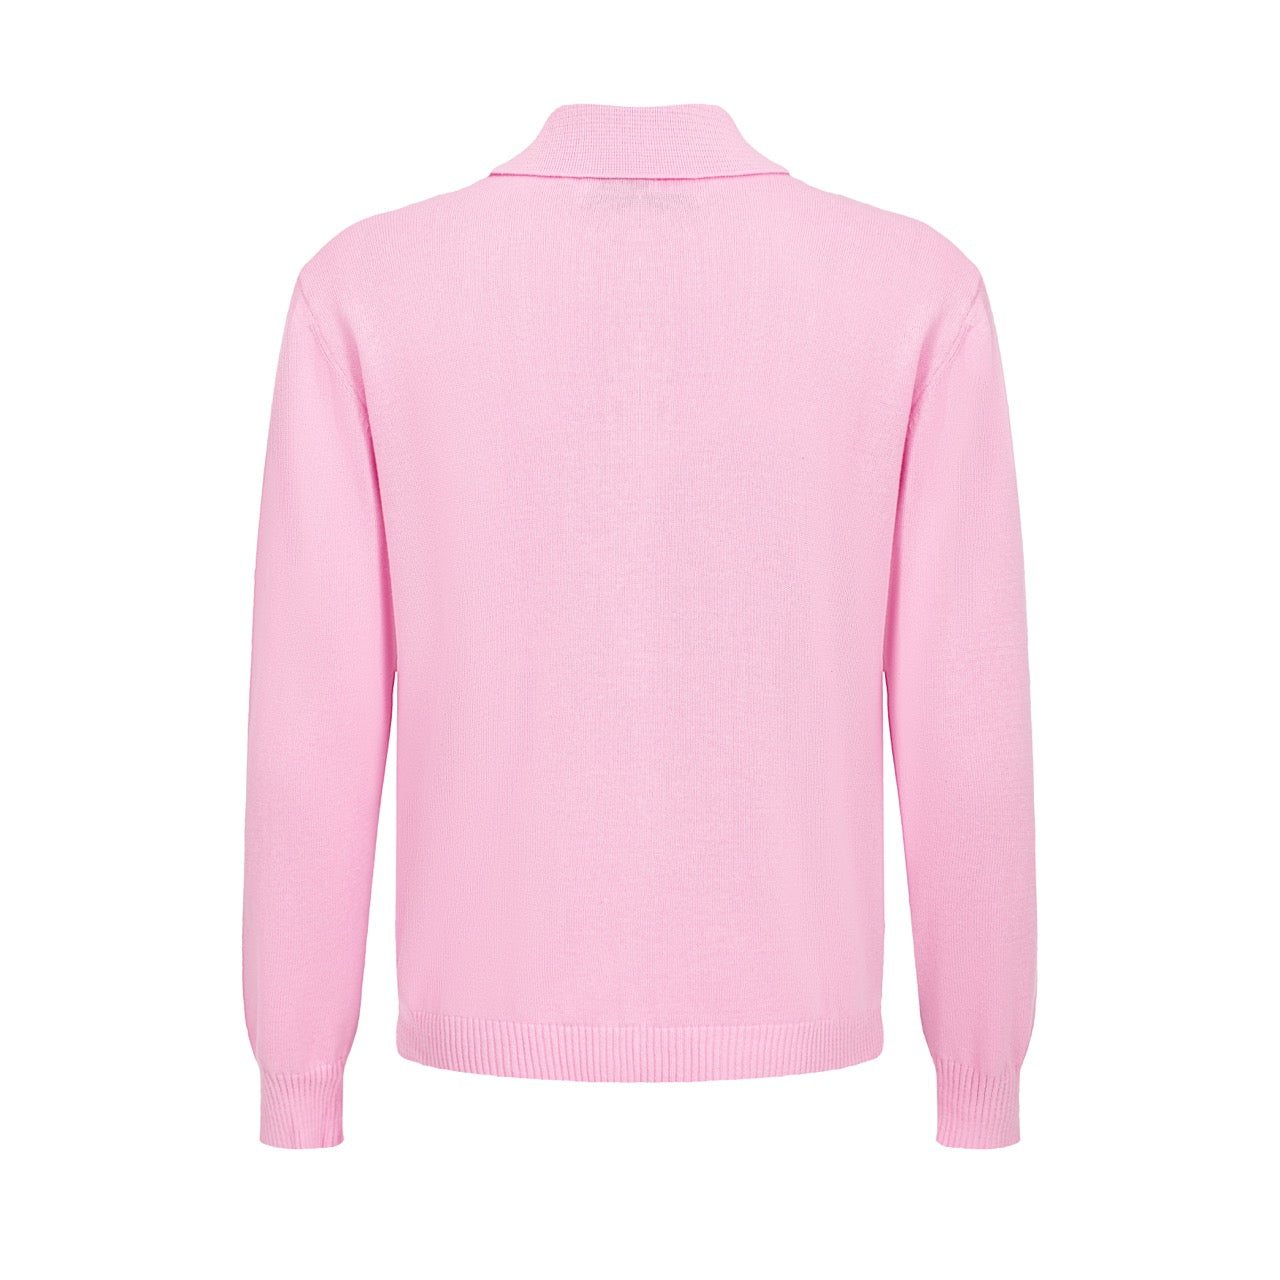 Men's Pink Knitted Long Sleeves Polo with Black & White Stripes